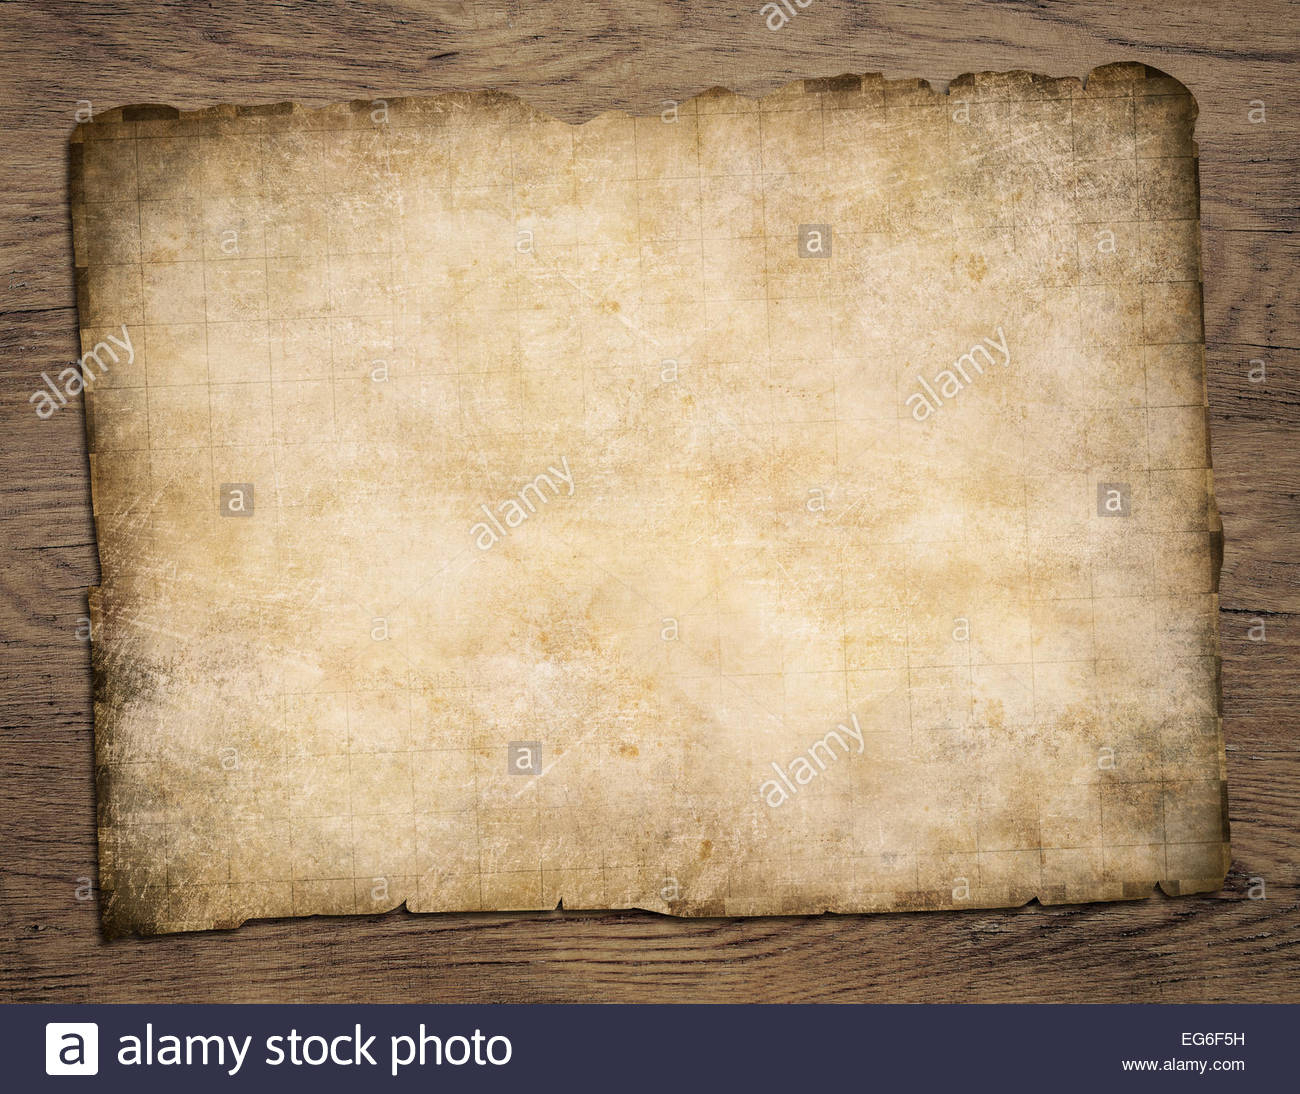 Old Blank Parchment Treasure Map On Wooden Table Stock Photo Regarding Blank Pirate Map Template